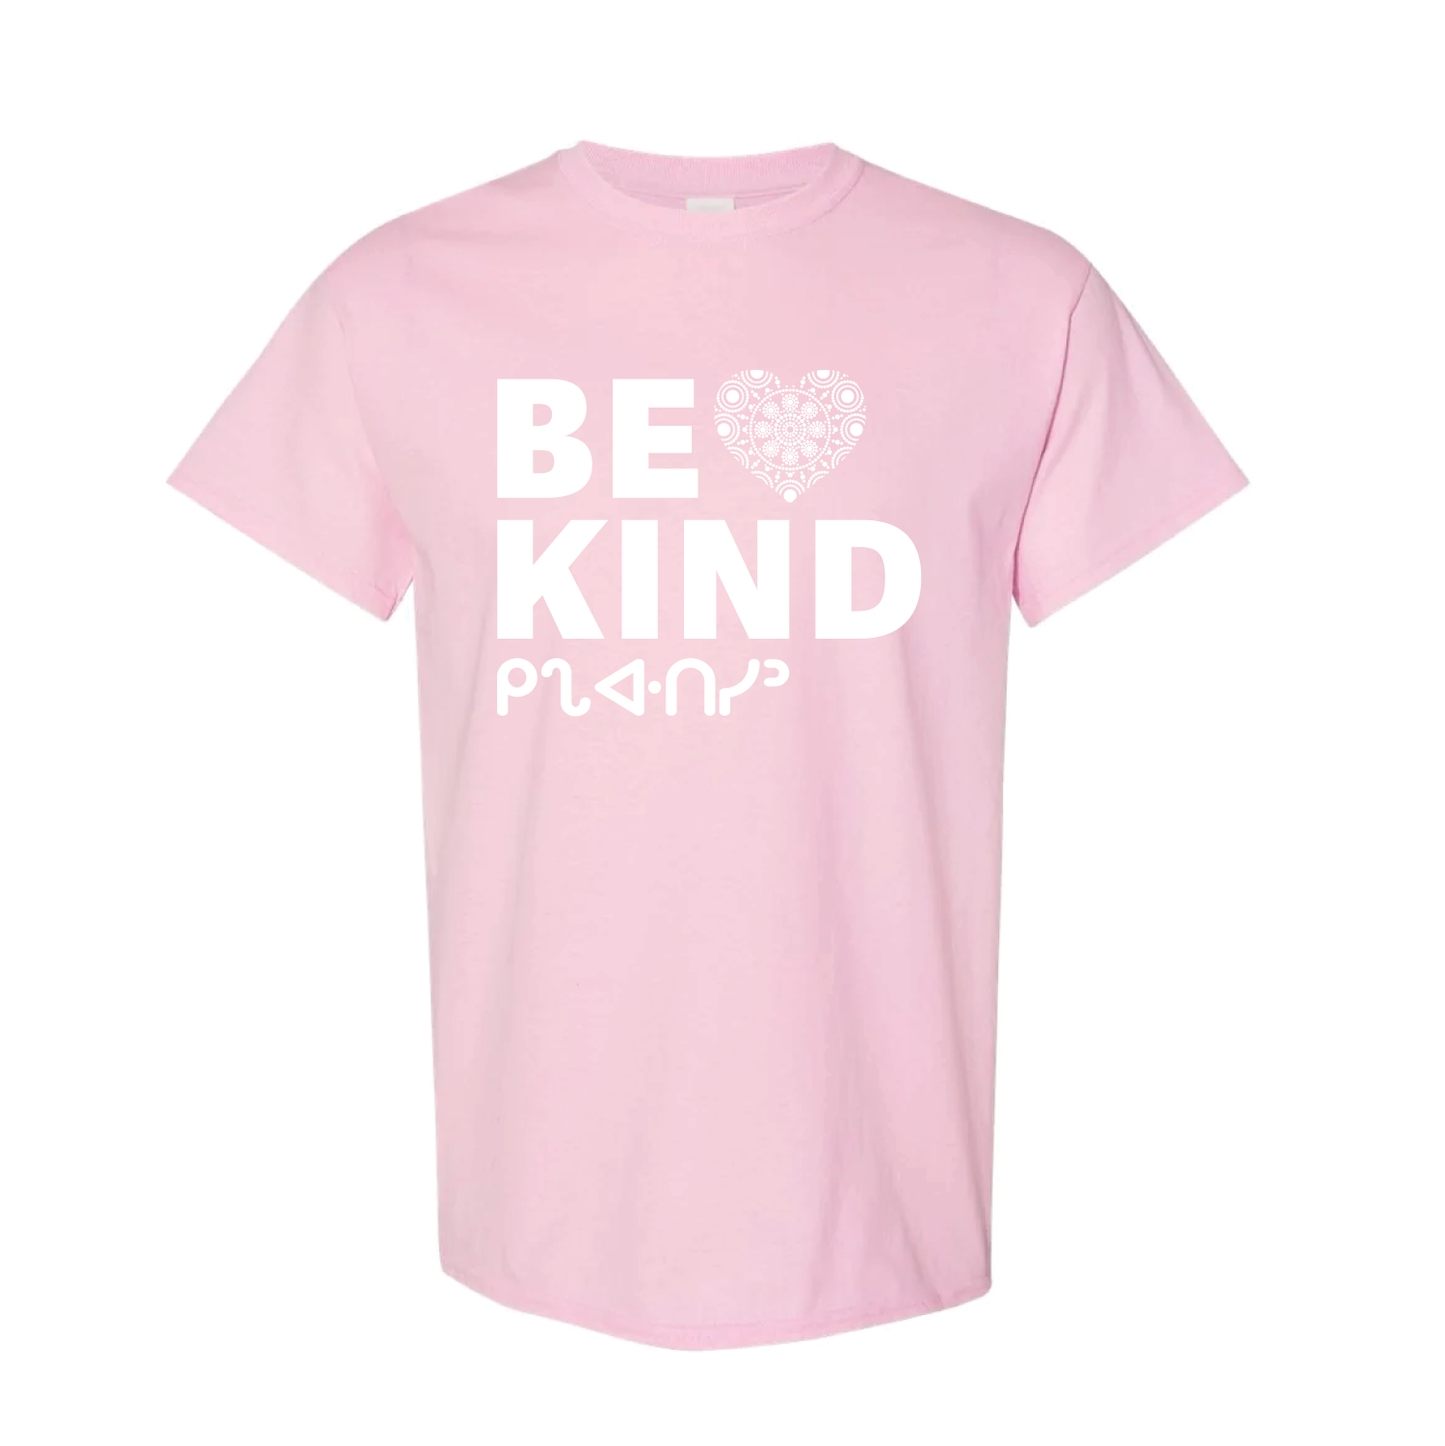 Adult/Youth Pink Shirt Day T-Shirts